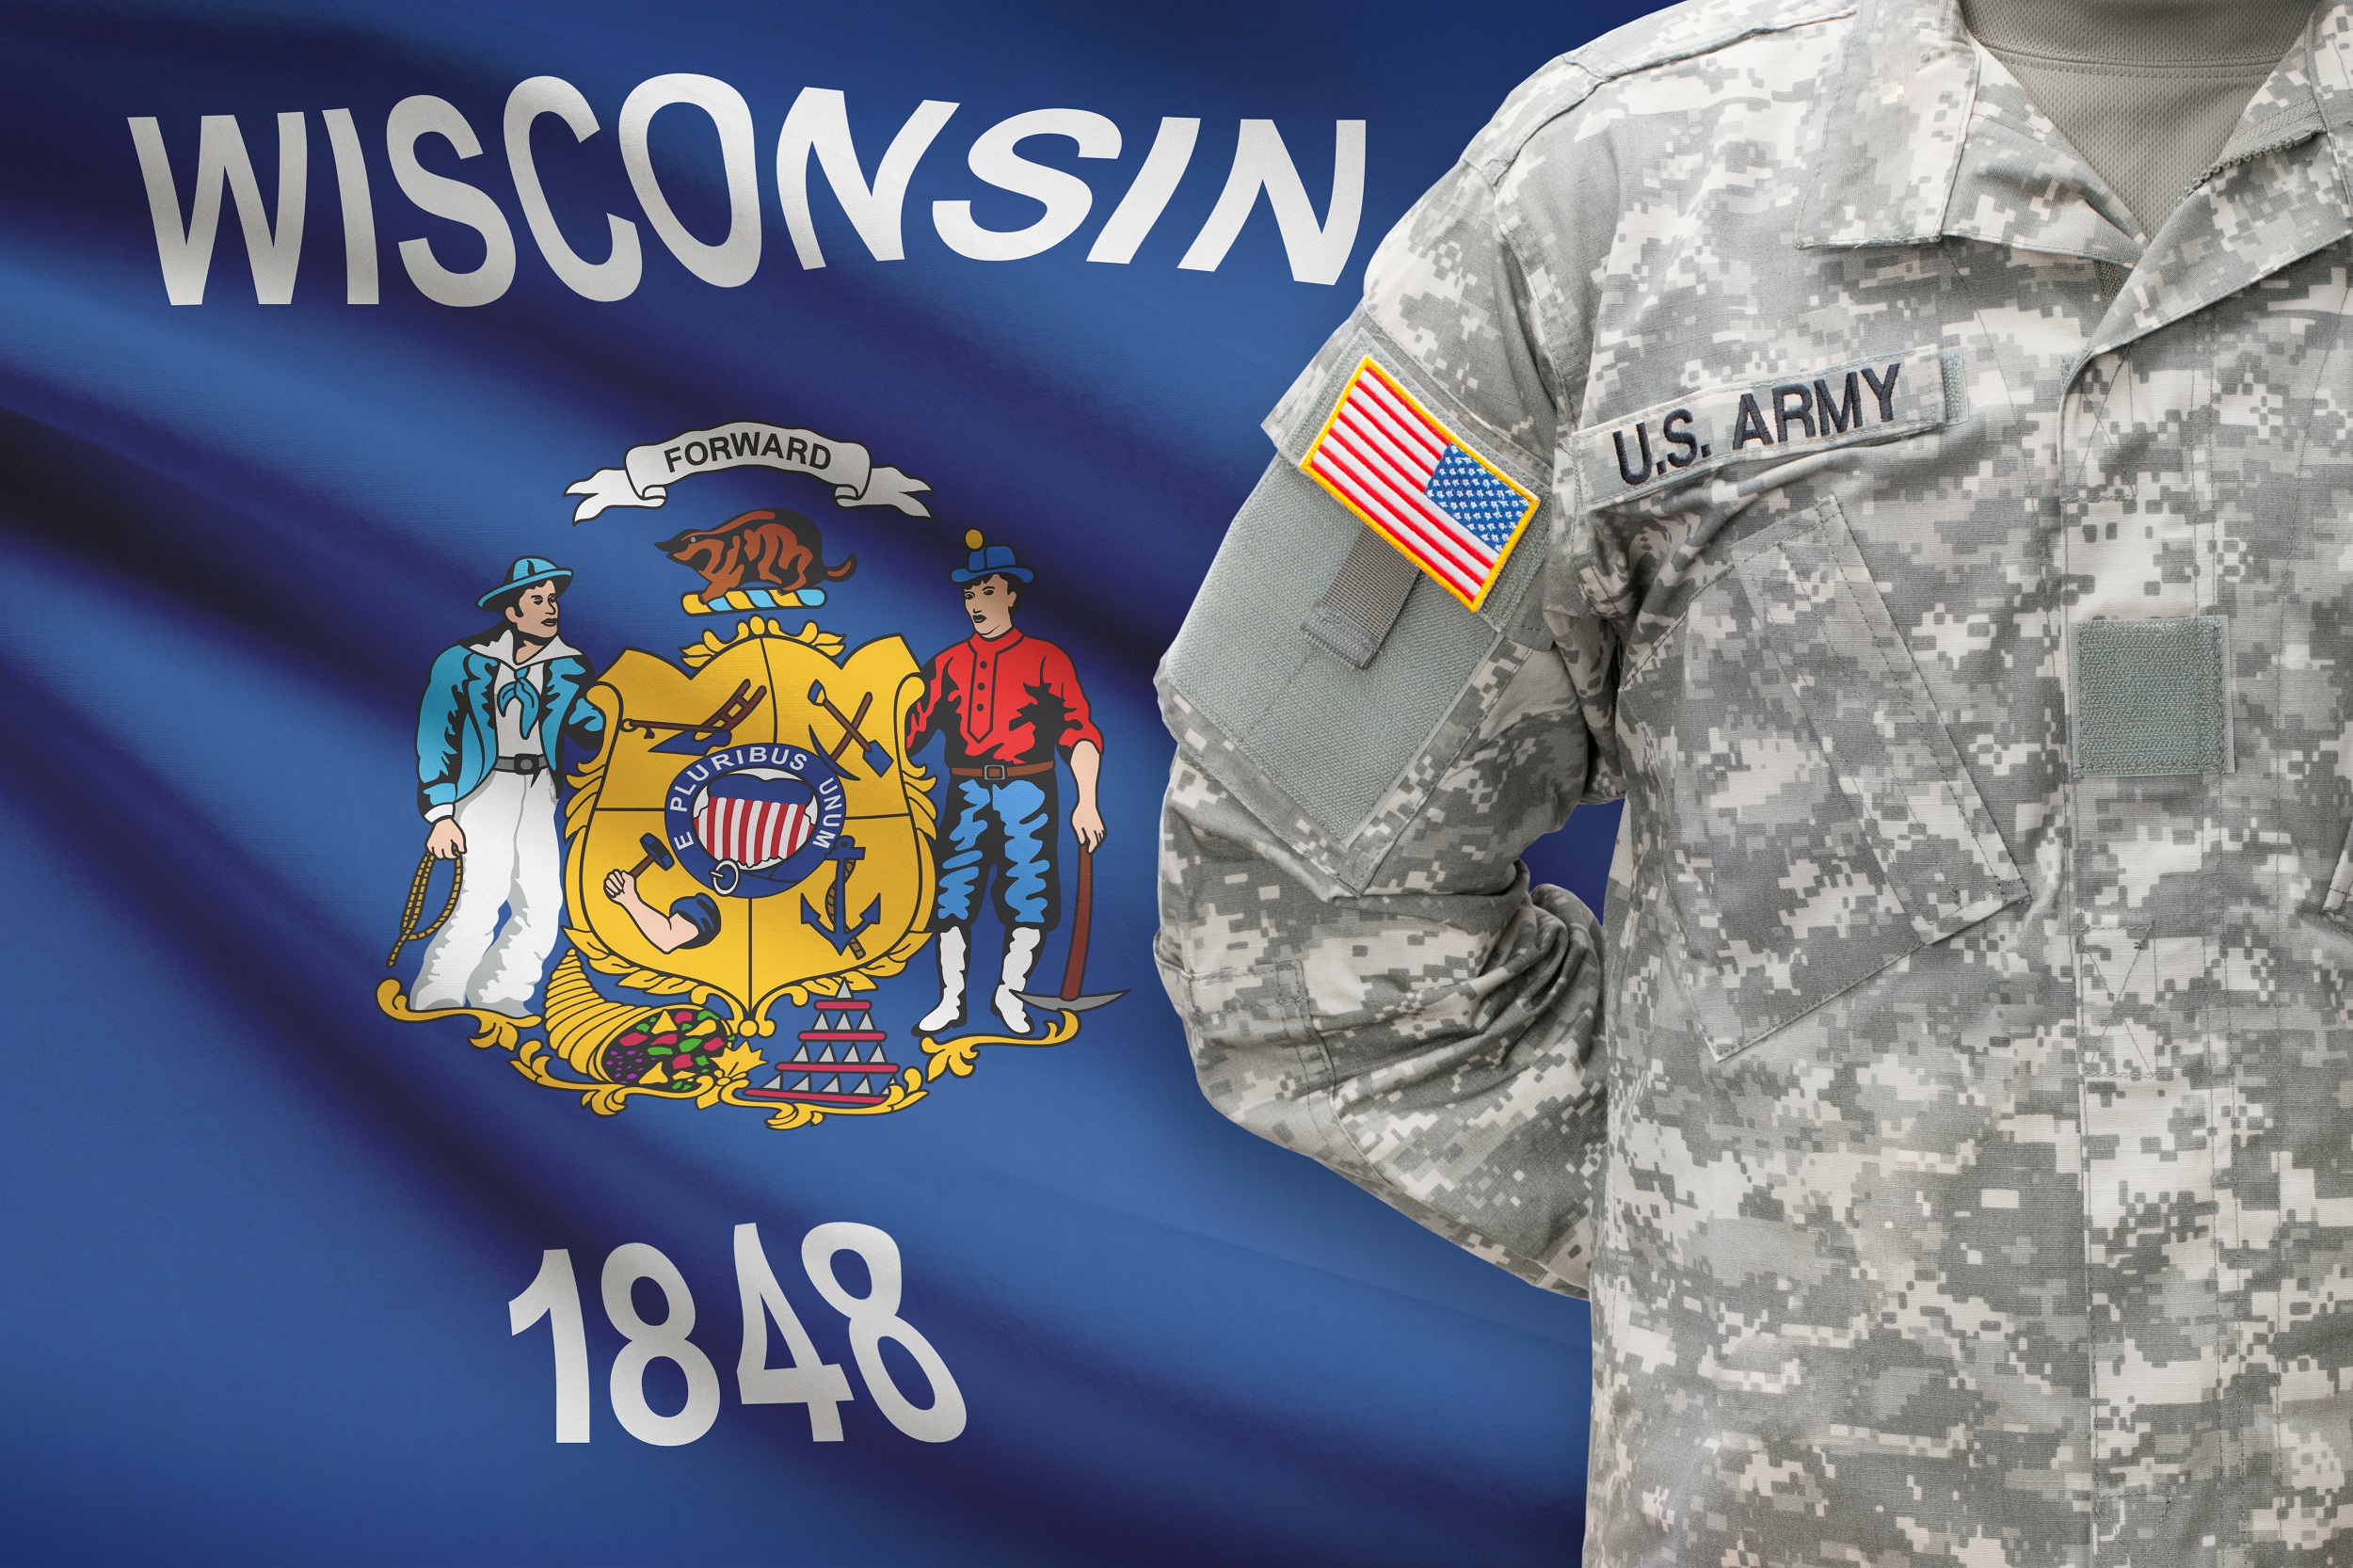 Wisconsin Veterans Board Chairman Steps Down Amid Child Porn Charges